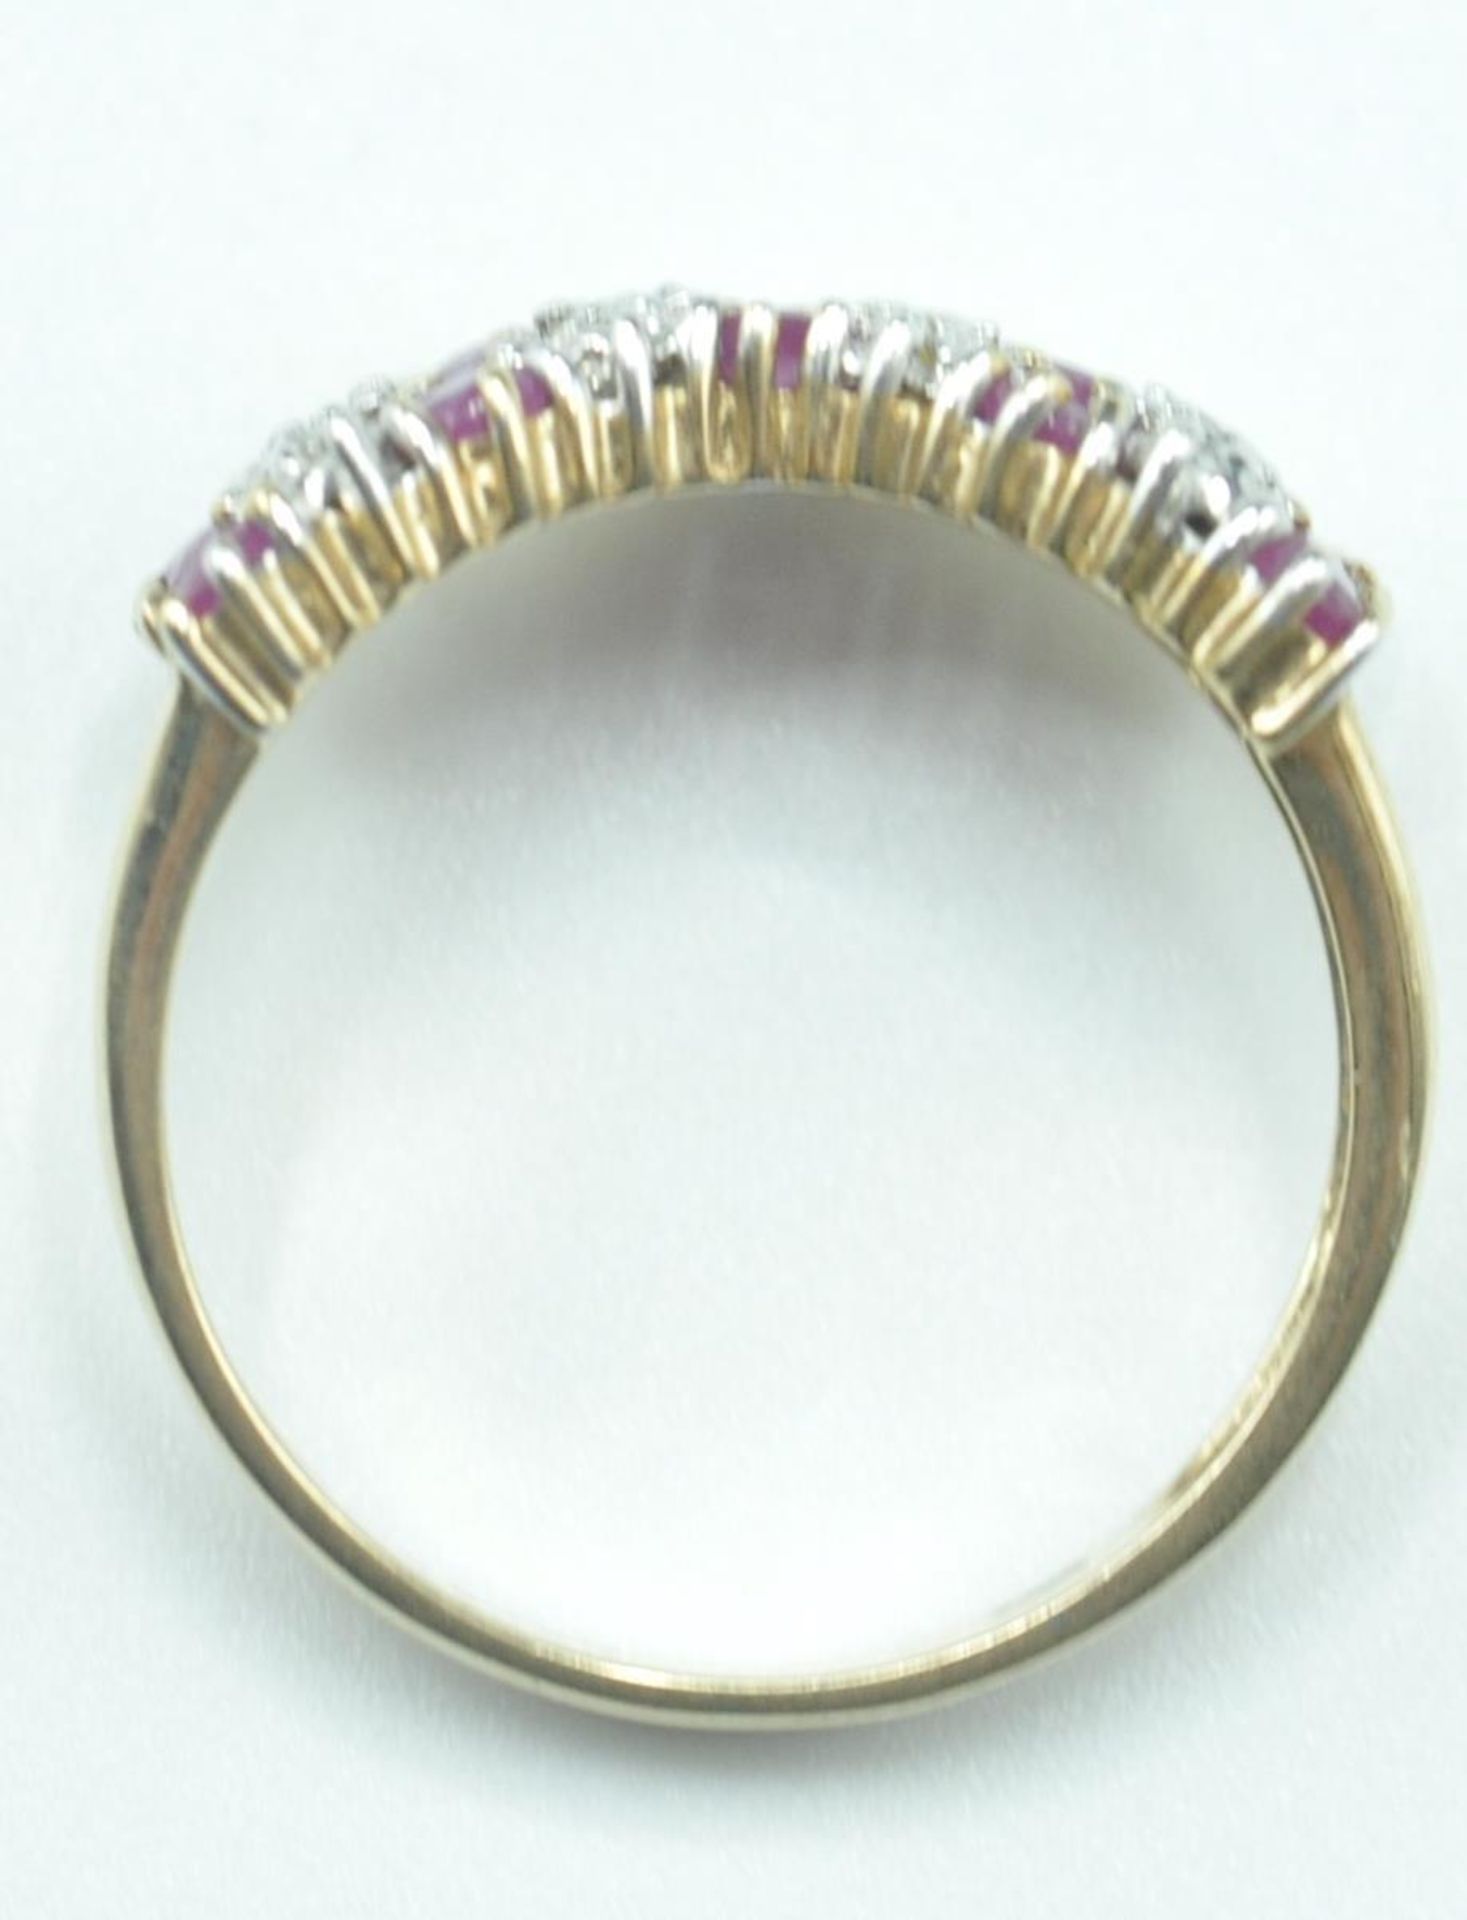 9CT GOLD PINK AND WHITE STONE RING - Image 6 of 6